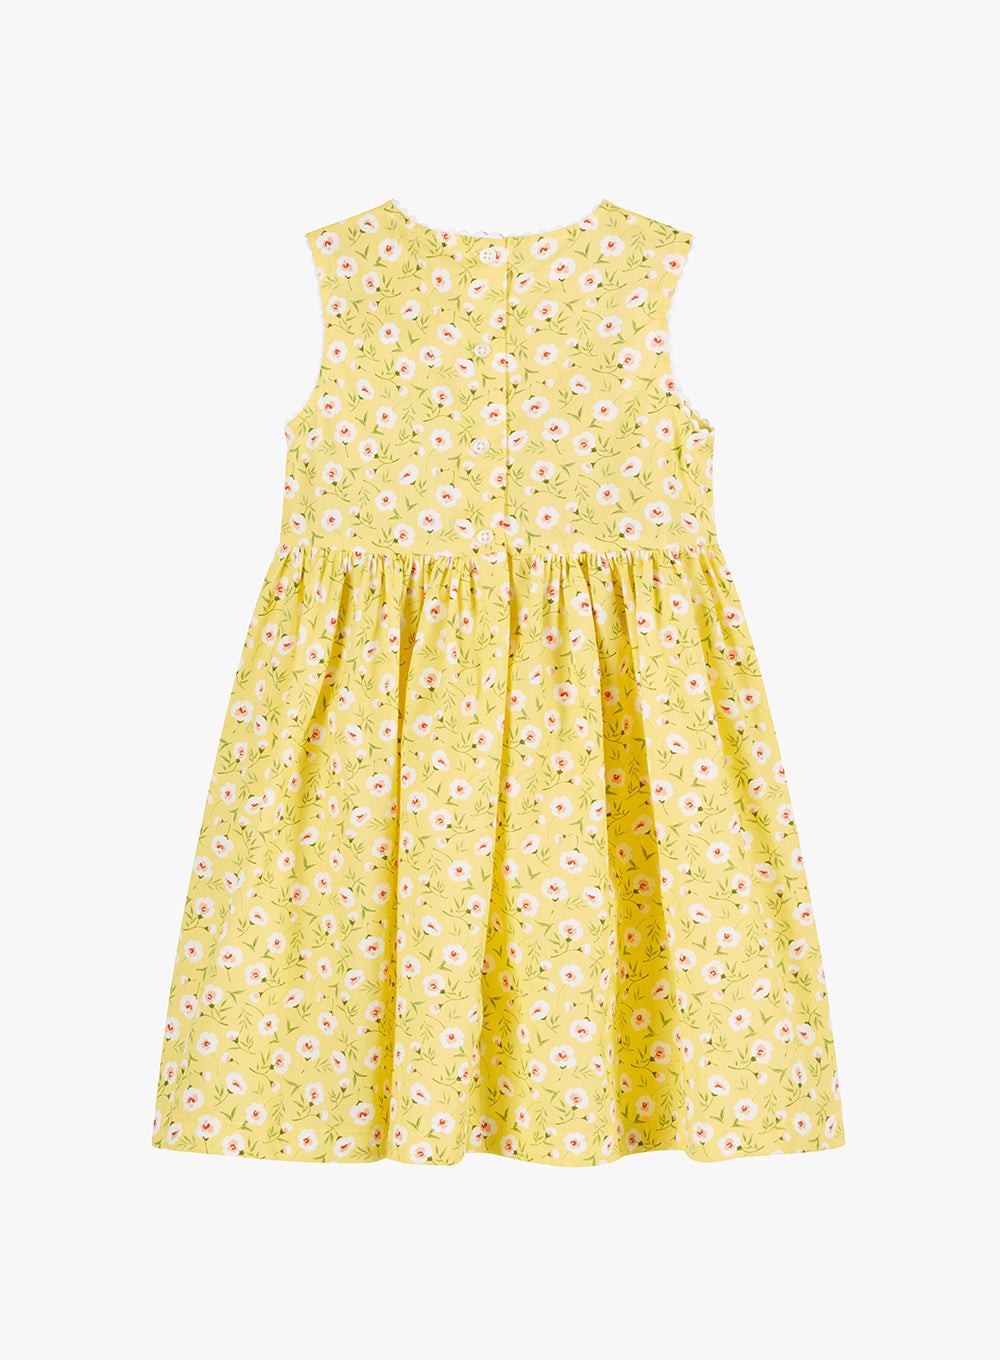 Confiture Dress Adelina Summer Dress in Yellow Poppy